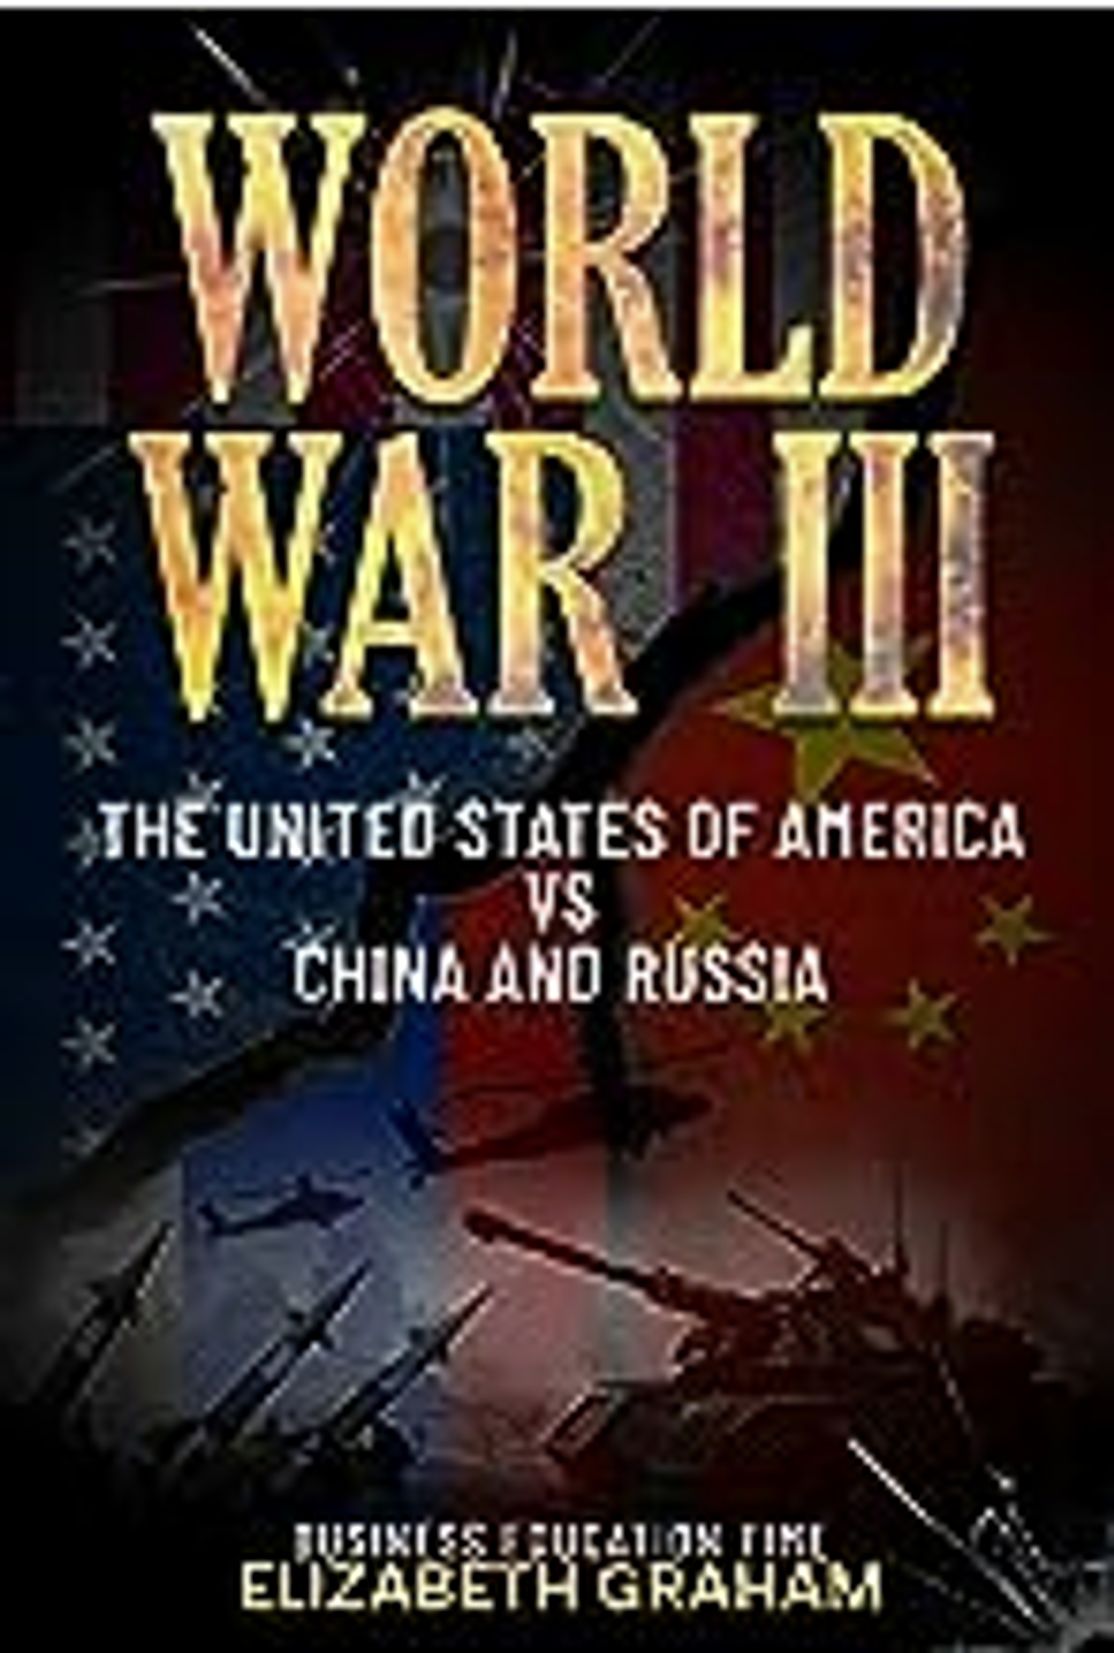 World War III: The United States Of America Vs China And Russia Kindle Edition